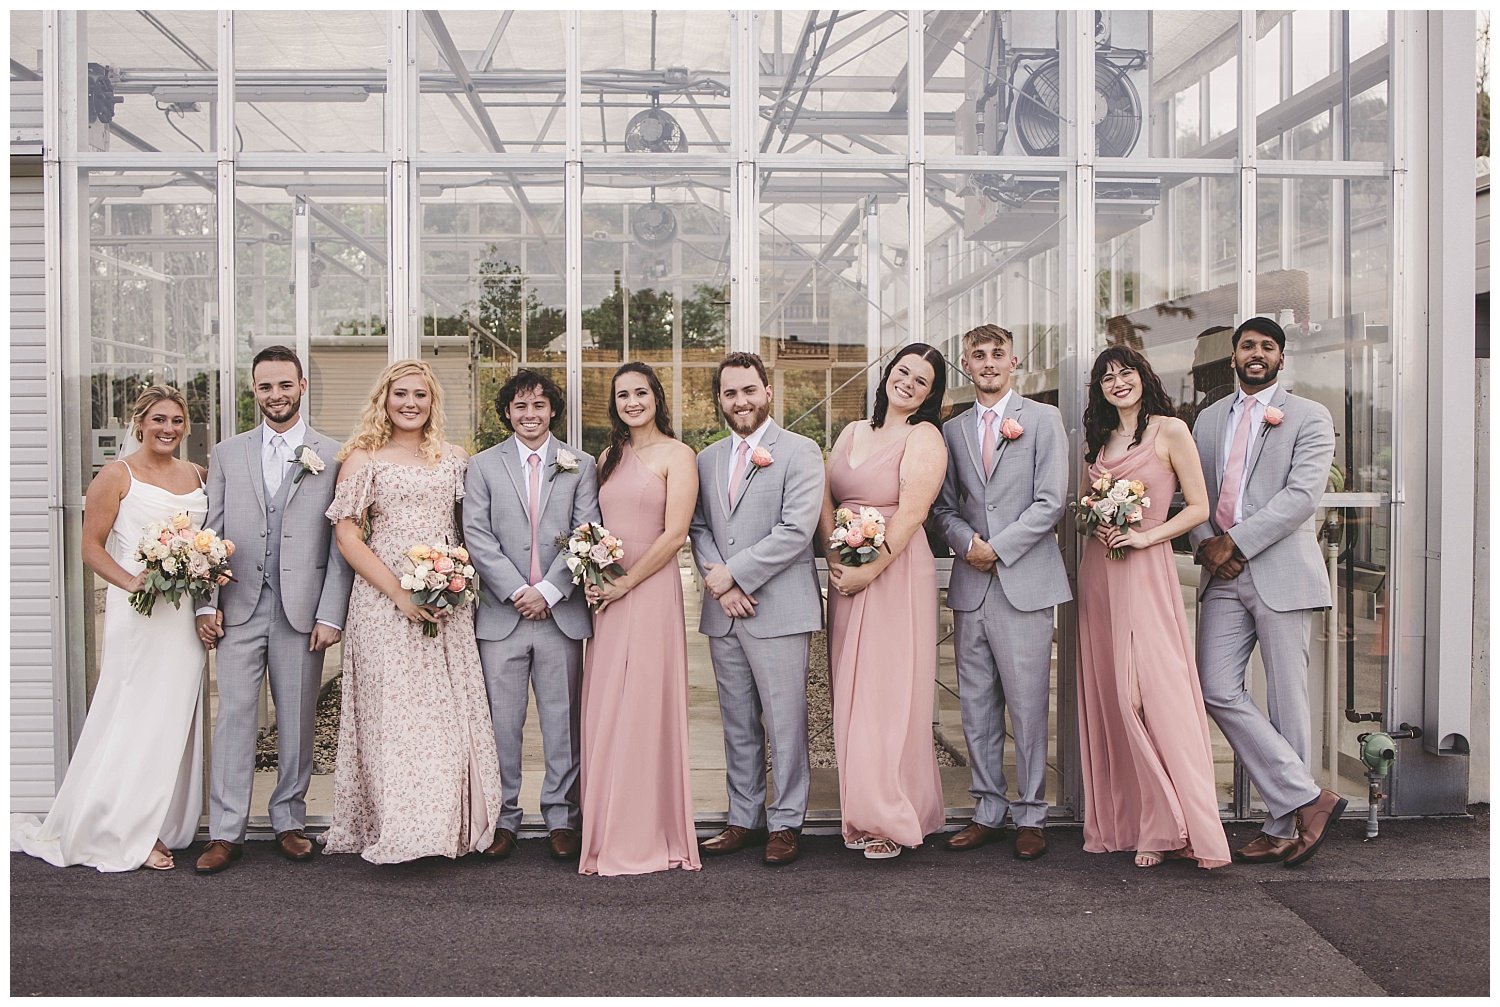 Bridal Party Photos in Front of the Greenhouse at Bonnet Springs Park, Lakeland, FL